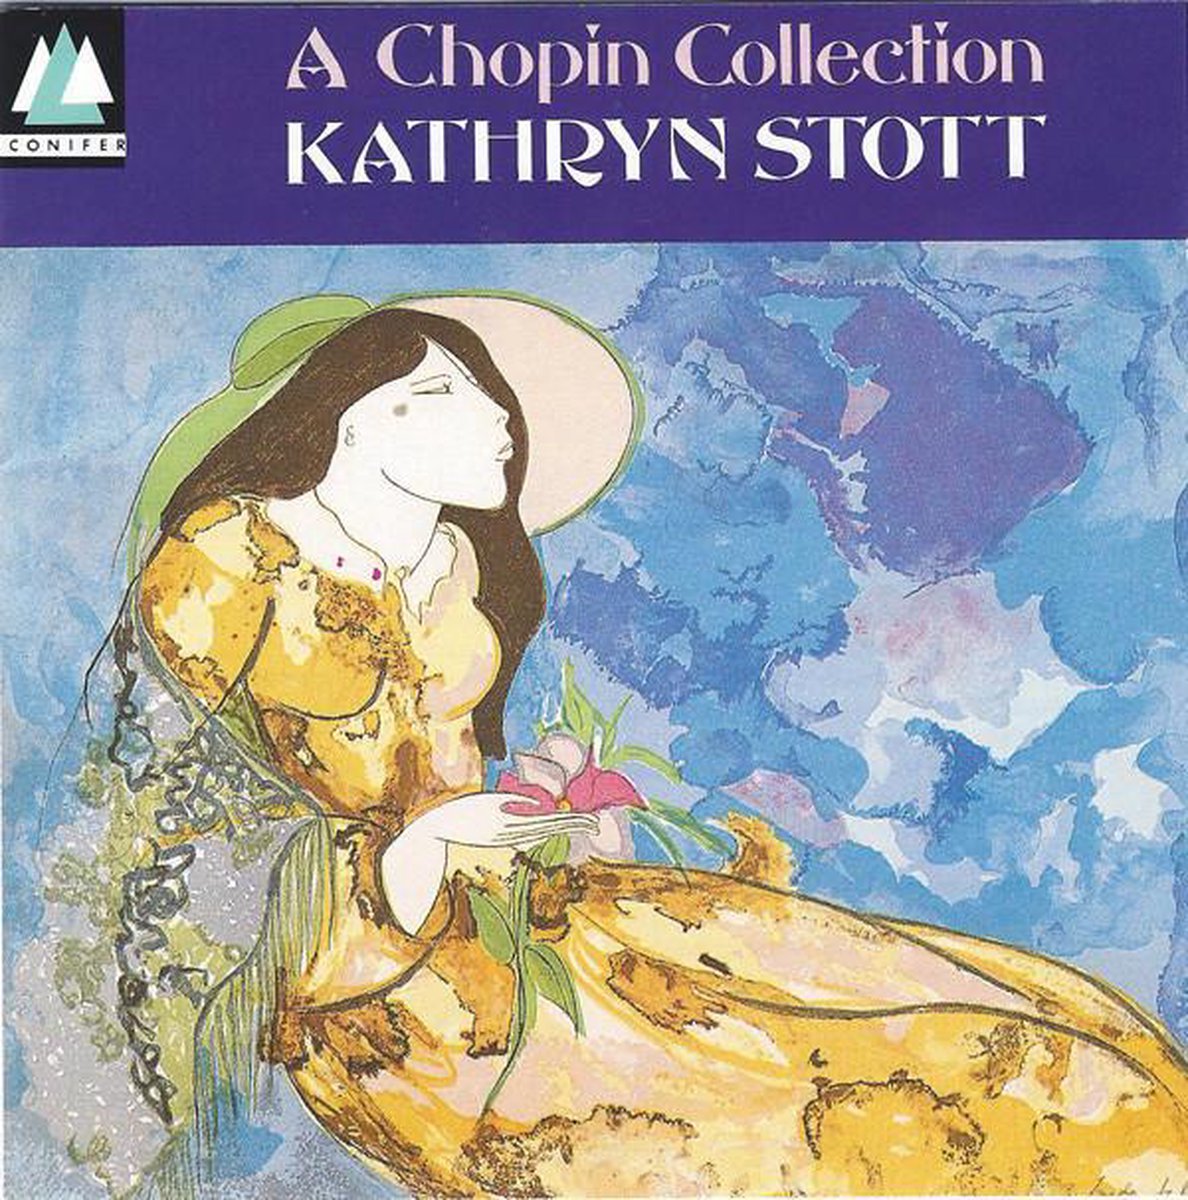 Kathryn Stott - A Chopin Collection